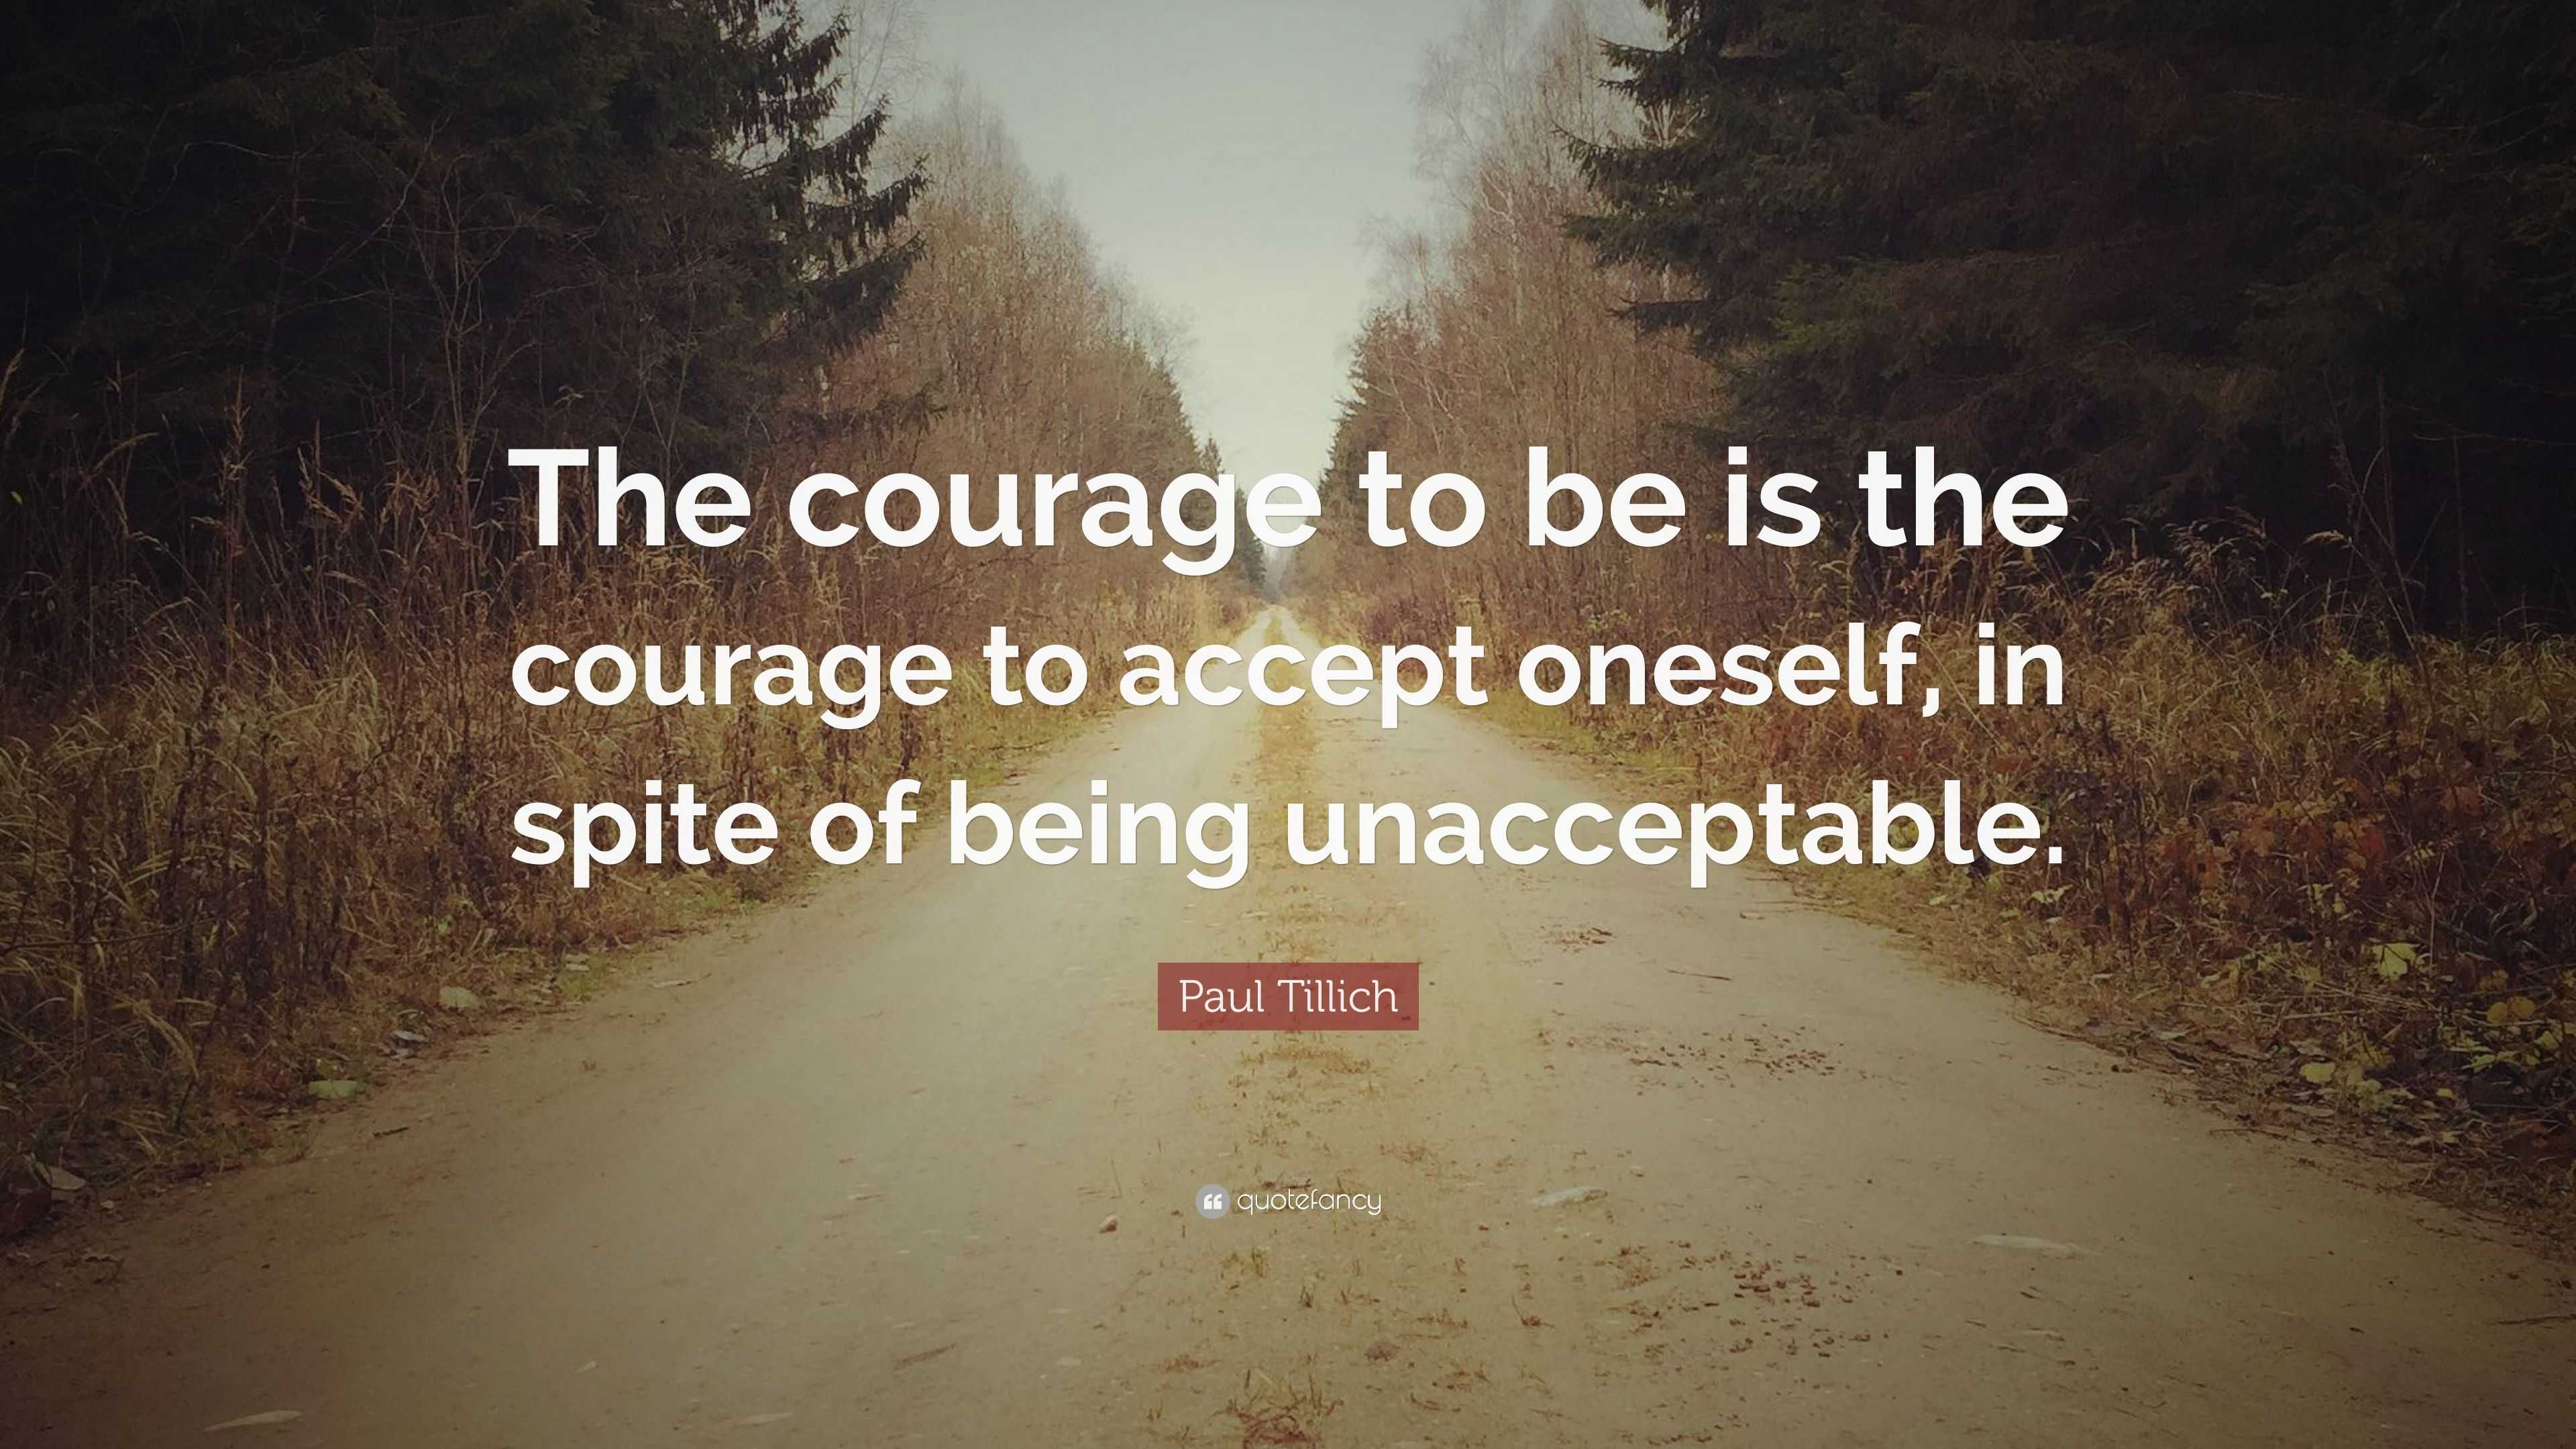 Paul Tillich Quote: “The courage to be is the courage to accept oneself ...